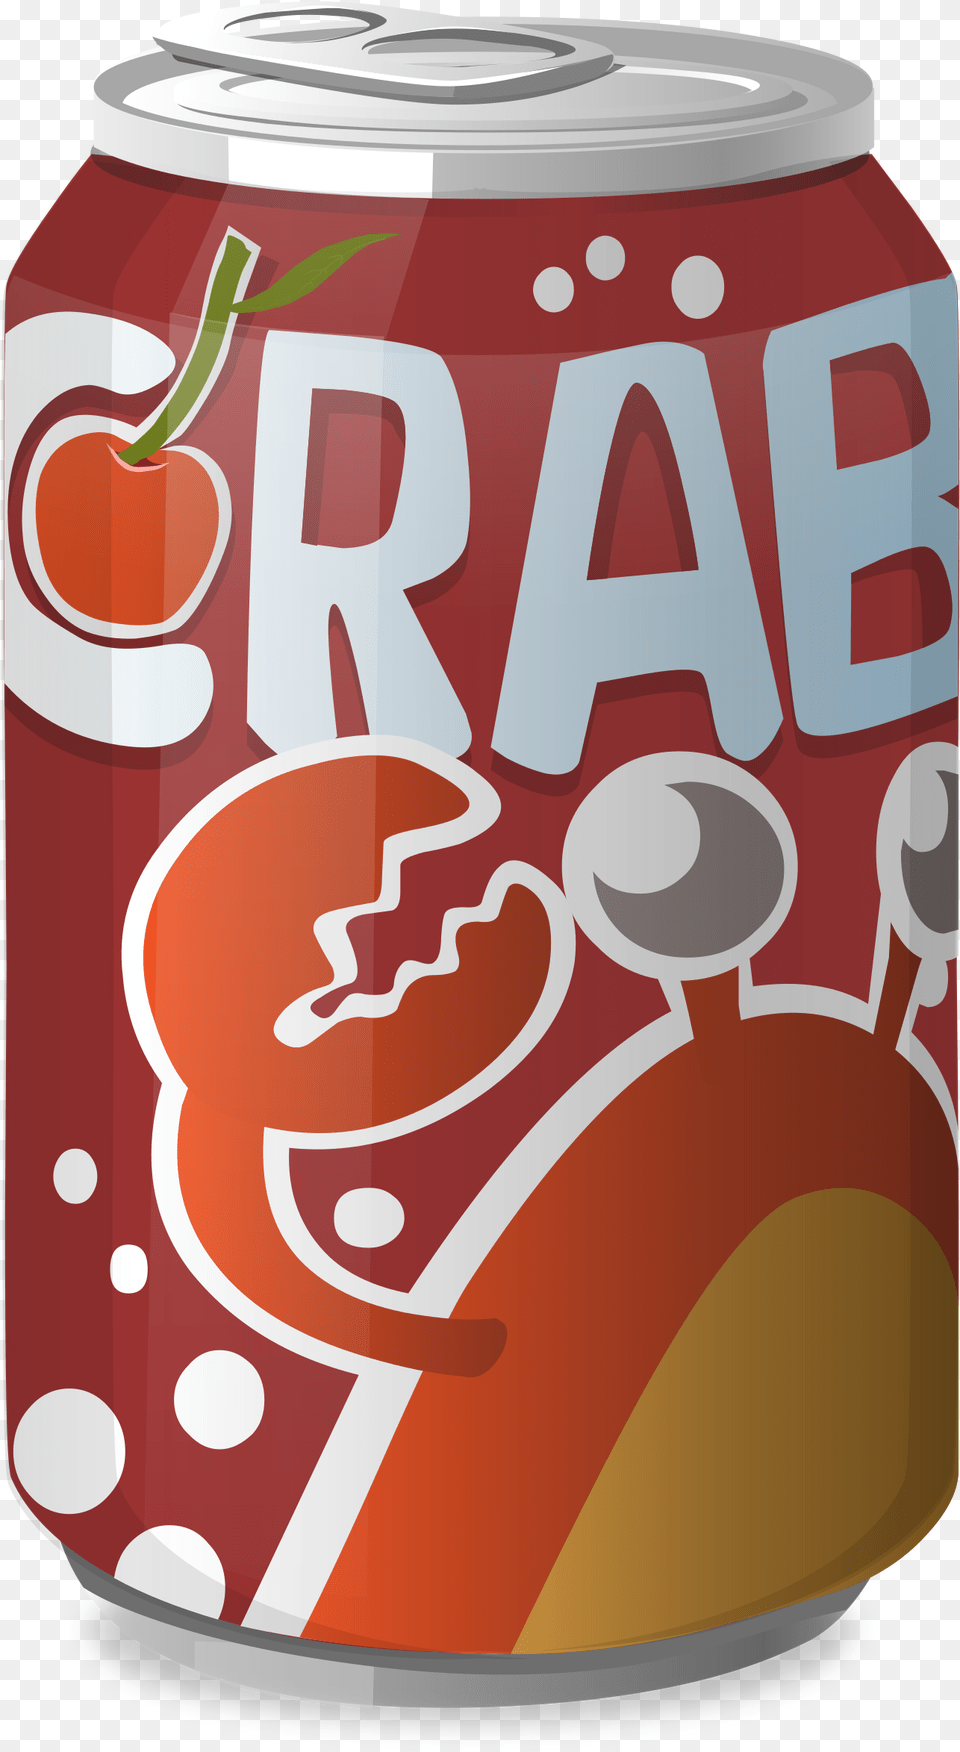 This Free Icons Design Of Crab Cola, Dynamite, Weapon, Beverage, Soda Png